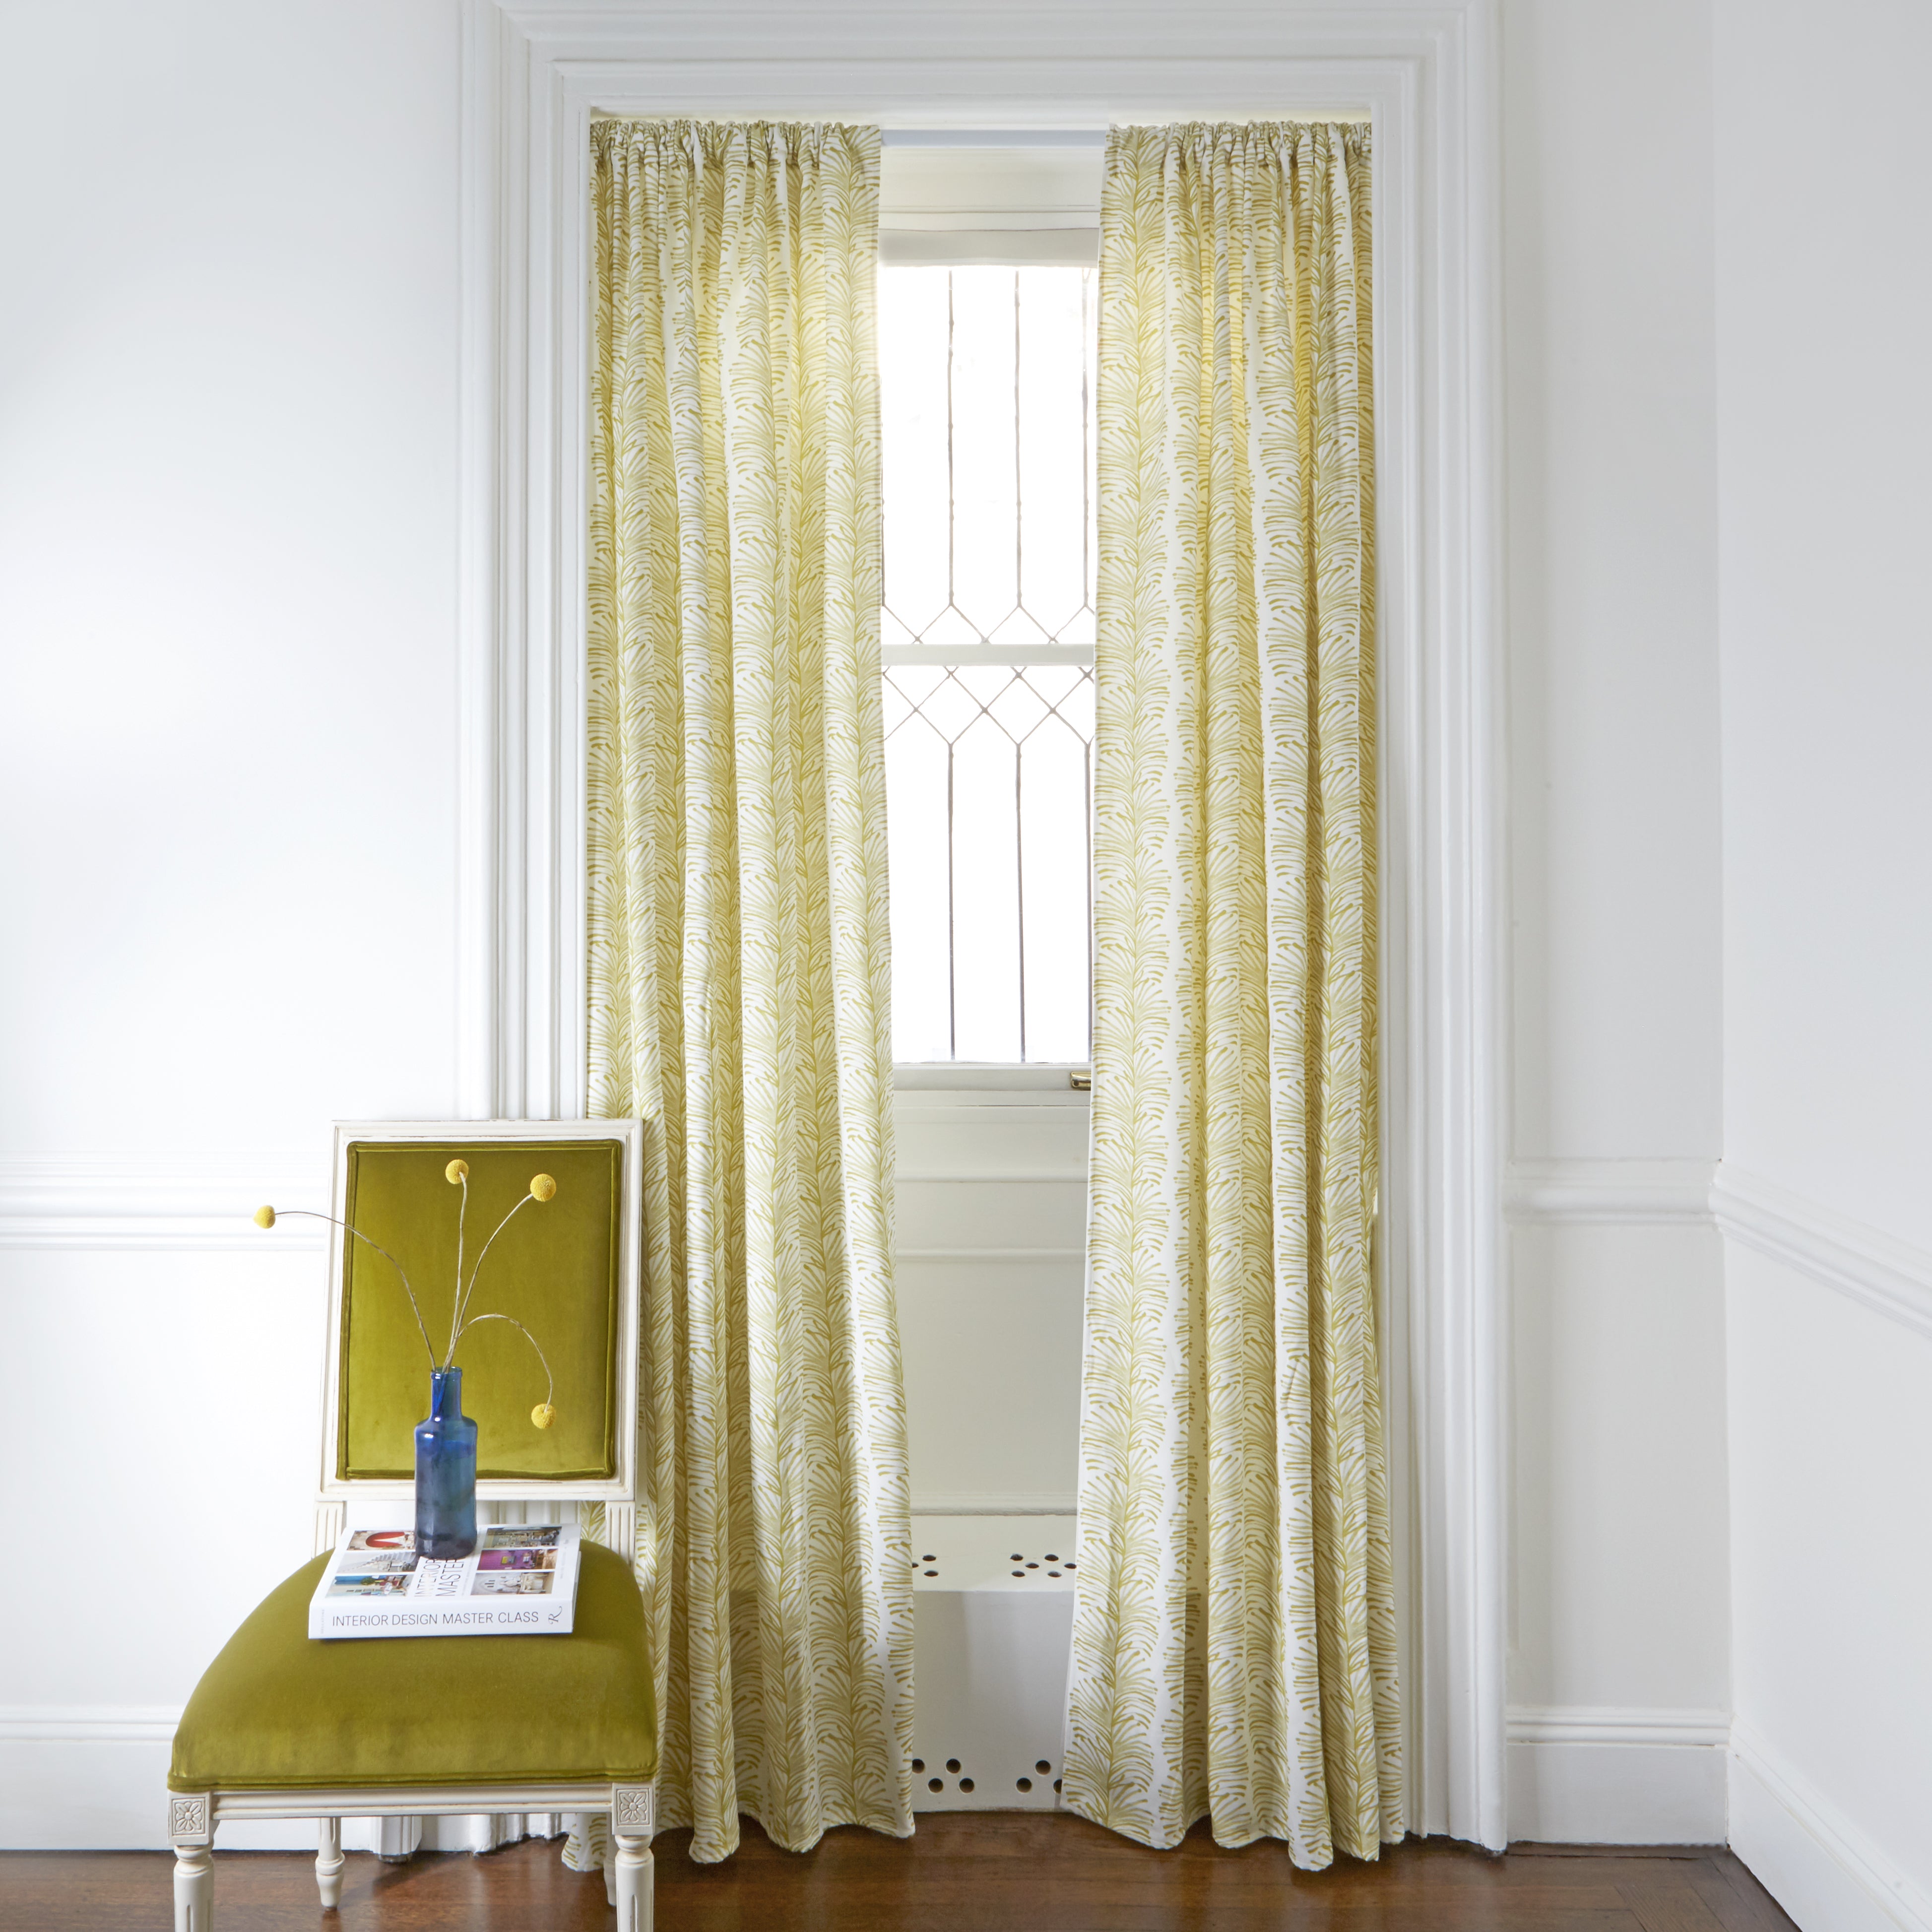 Yellow Stripe Chartreuse Printed Curtains on white rod in front of an illuminated window with Mustard Yellow Velvet chair with plants in blue clear vase on top of white book